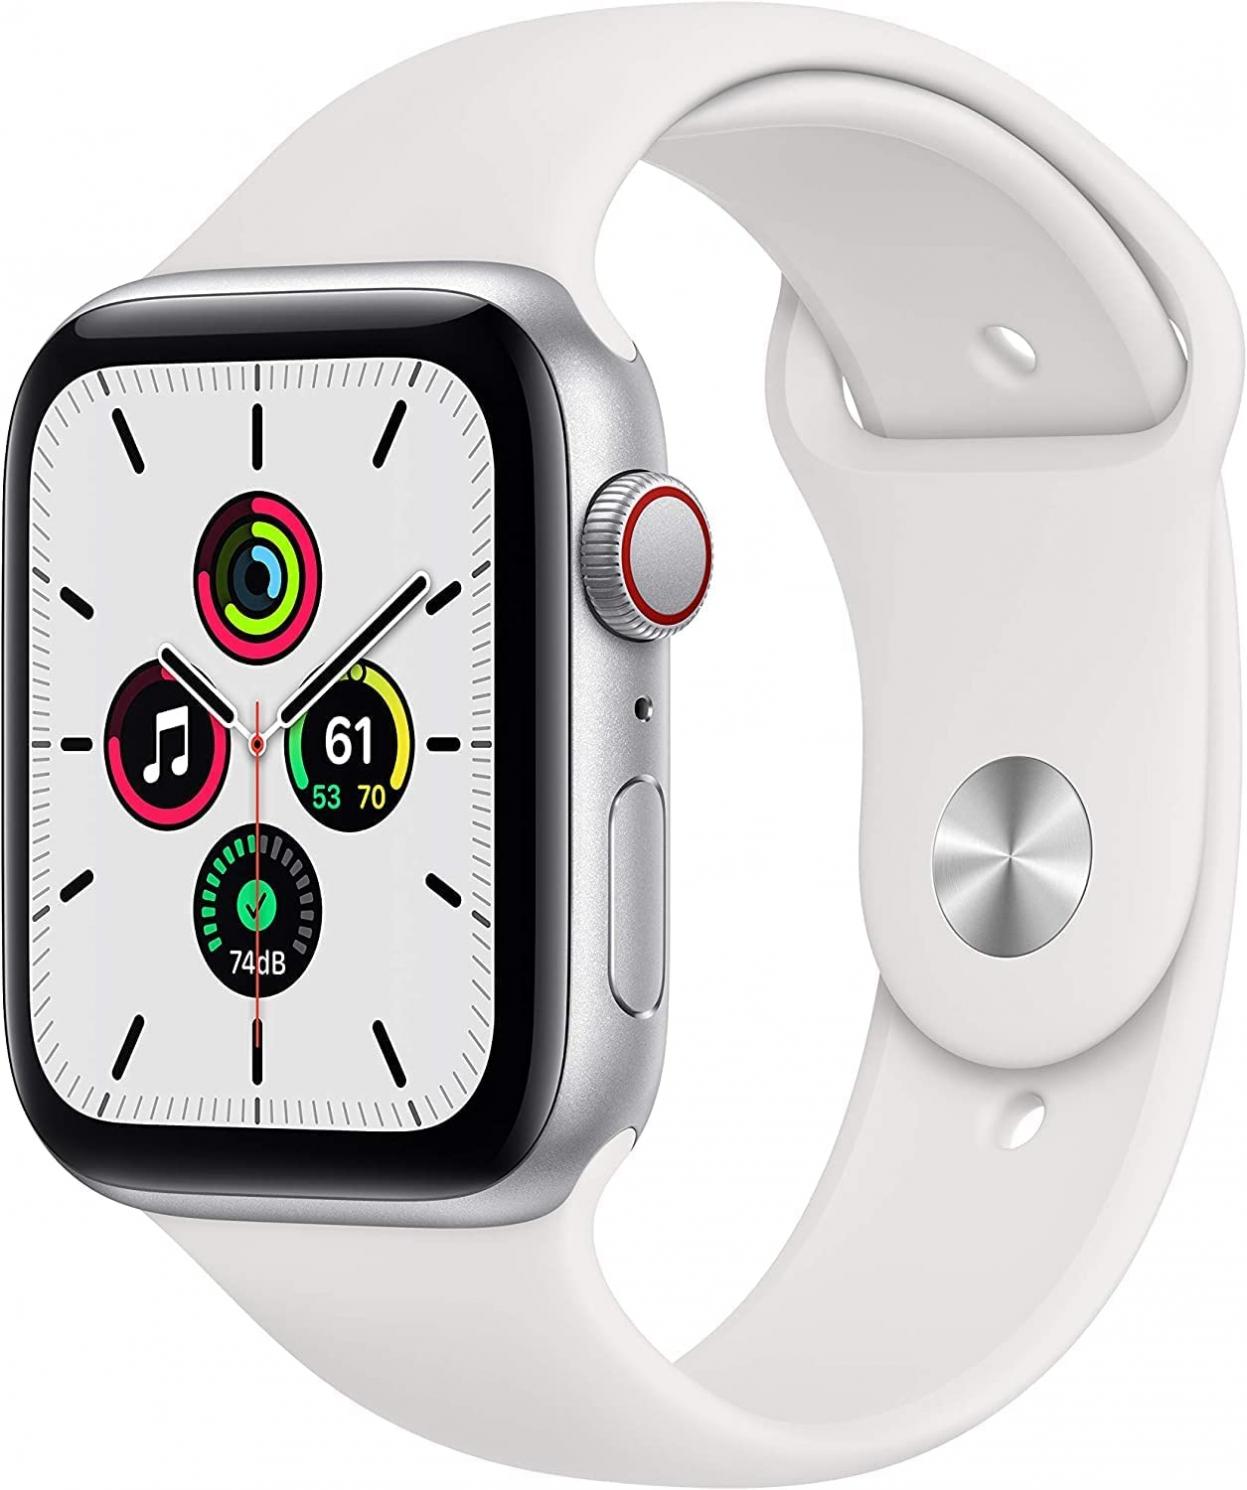 Apple Watch SE (GPS + Cellular, 40mm) - Silver Aluminum Case with White Sport Band (Renewed)